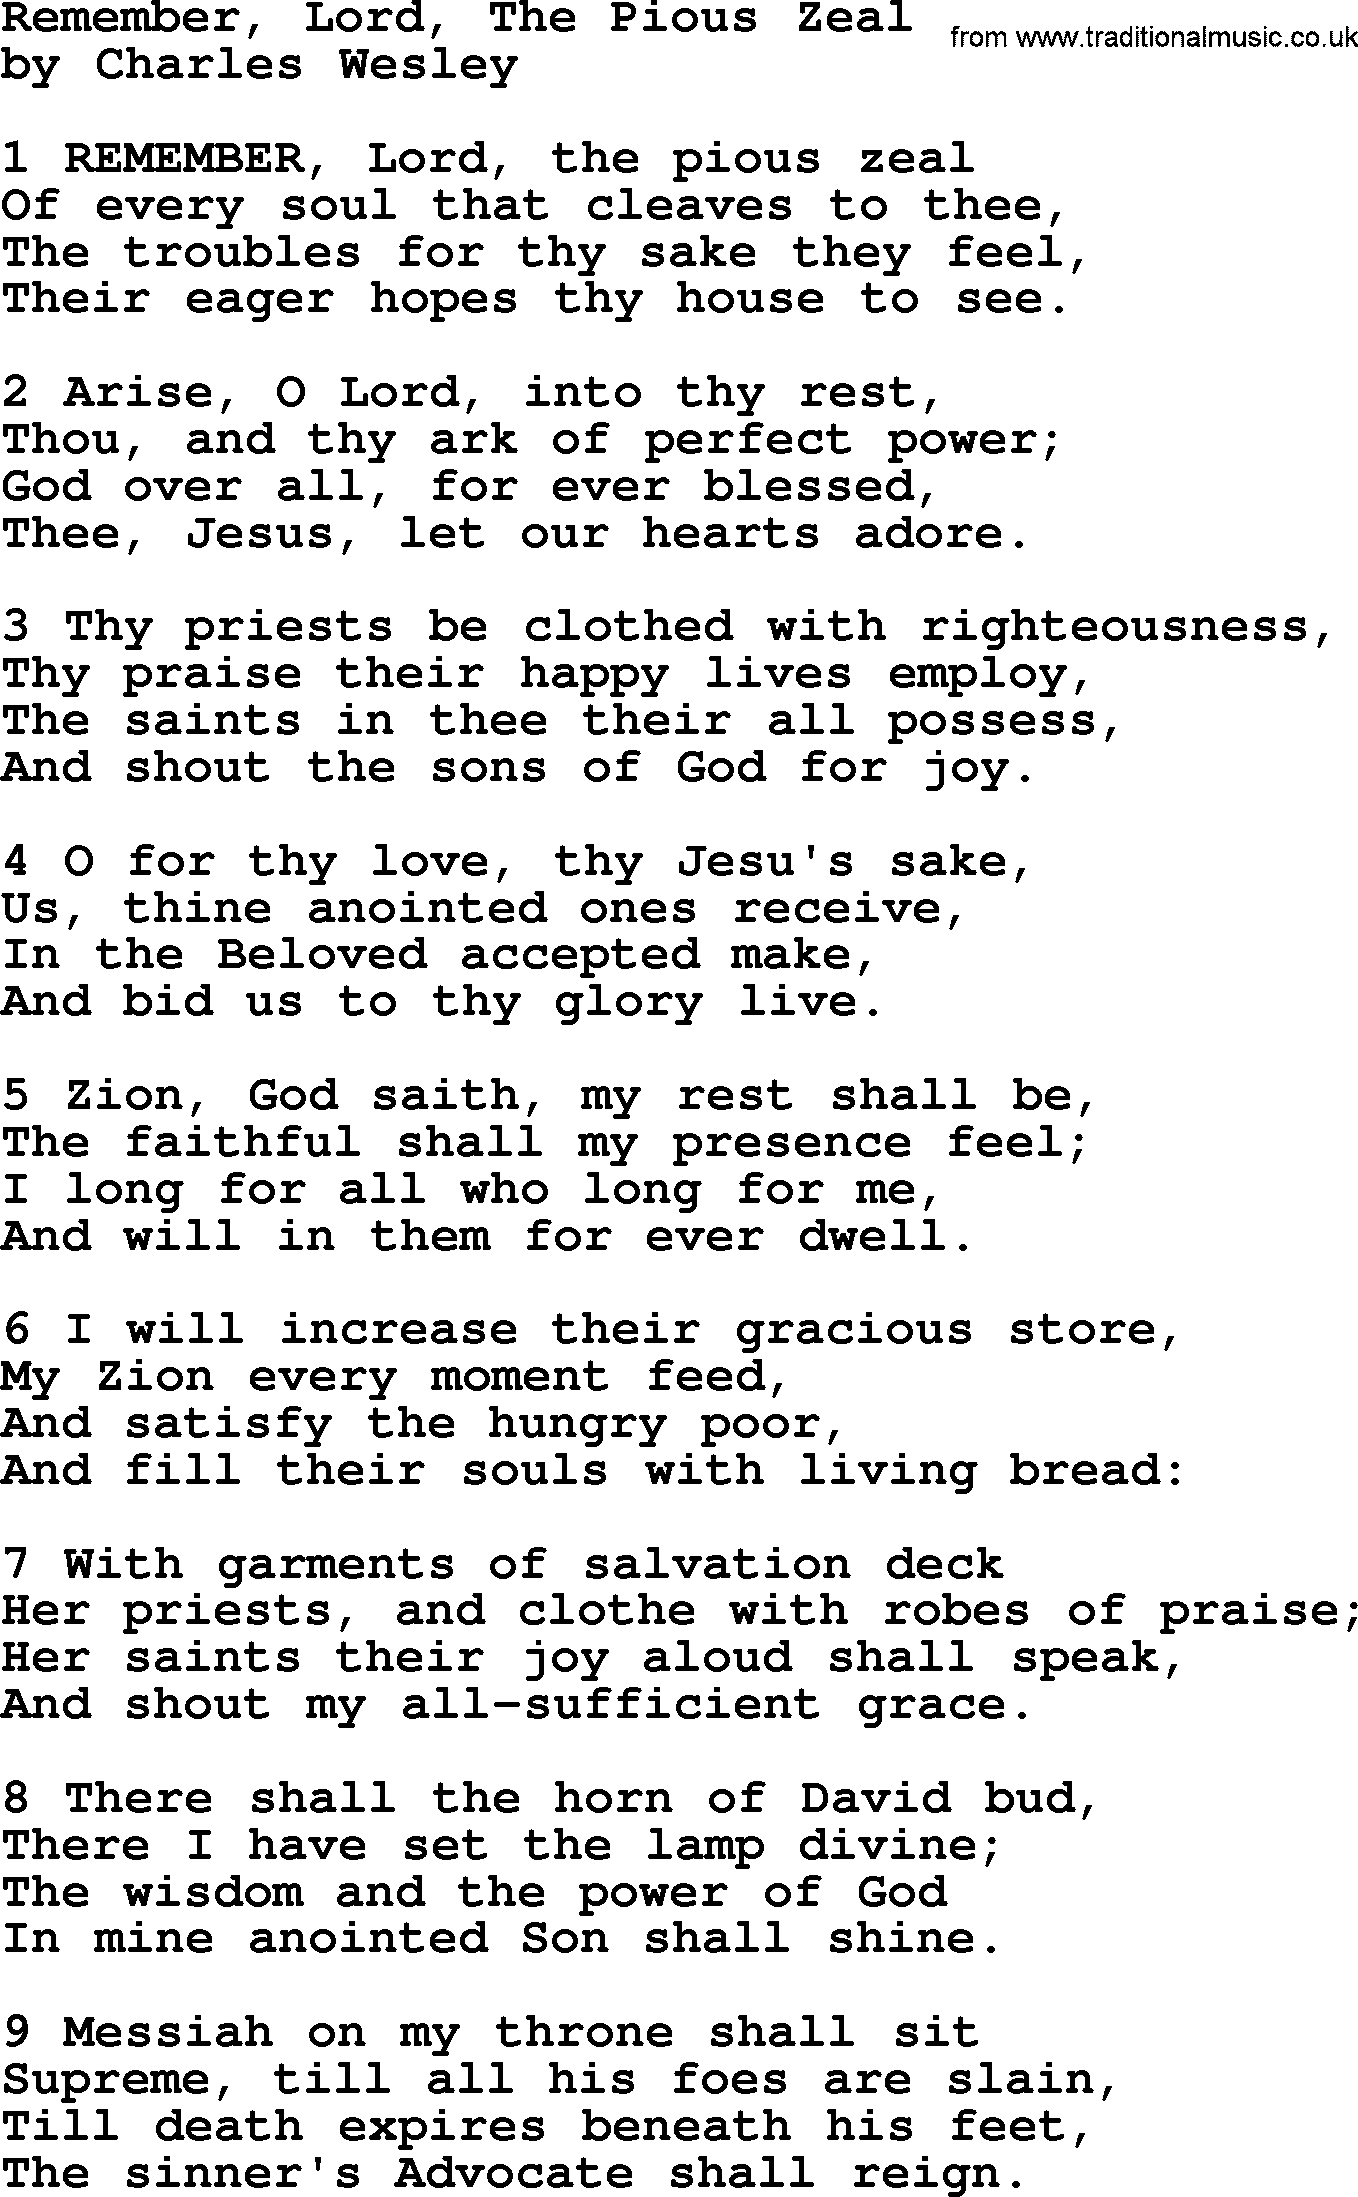 Charles Wesley hymn: Remember, Lord, The Pious Zeal, lyrics